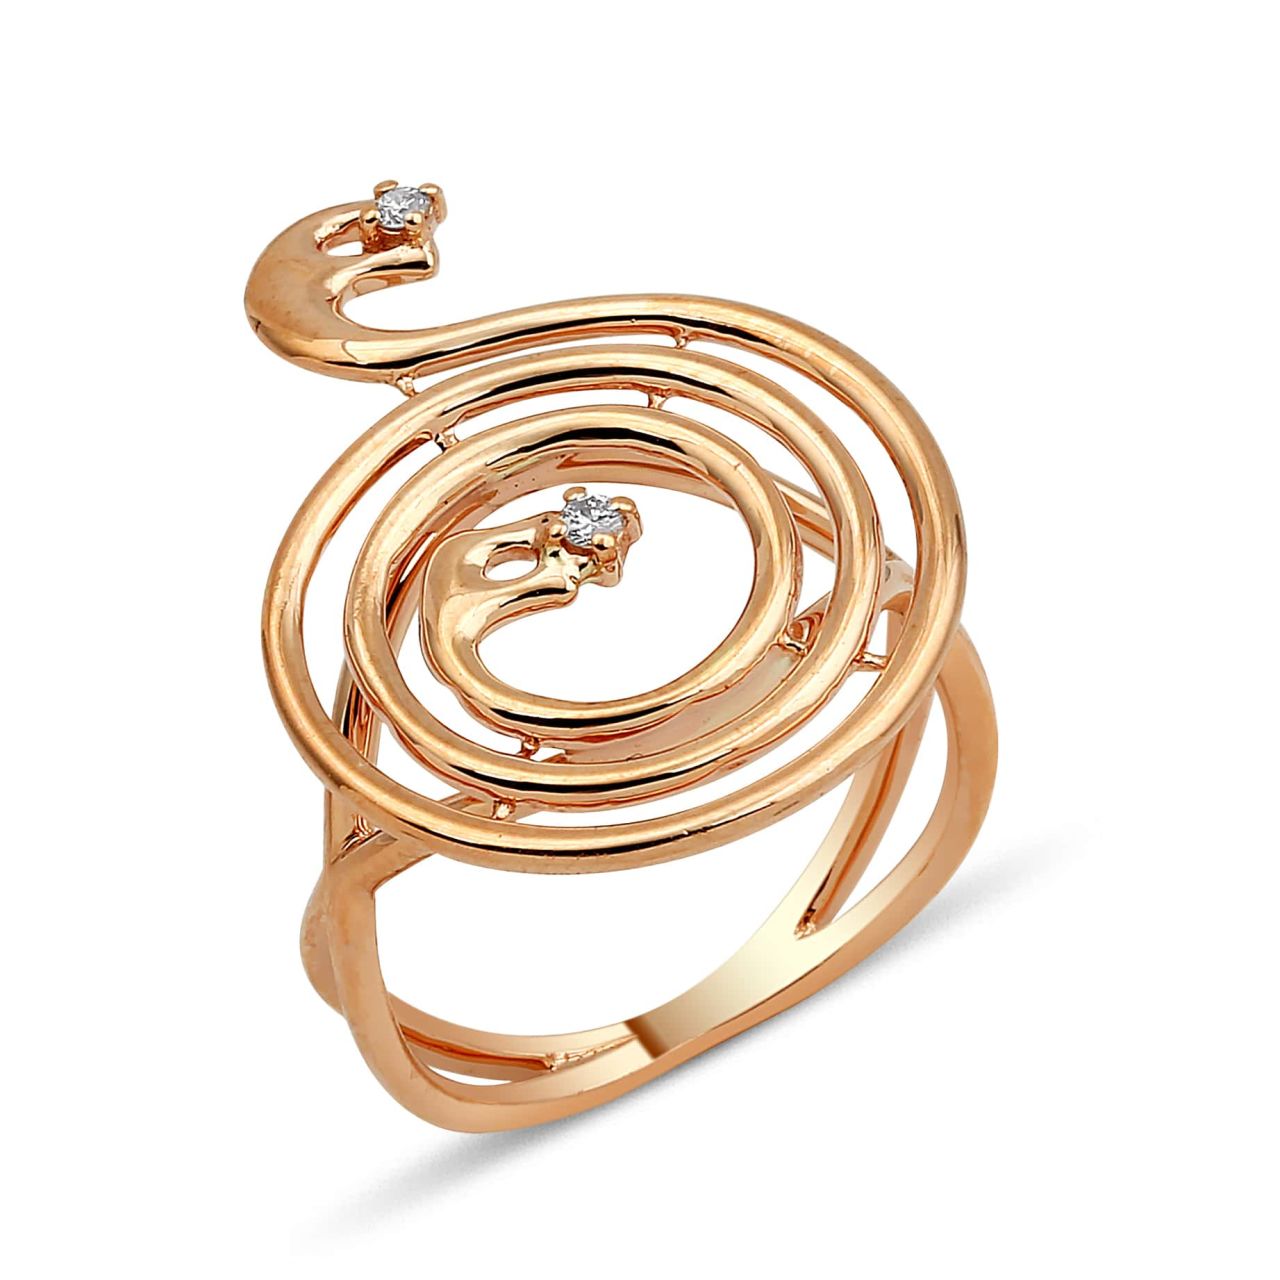 Serpent, Curled Snake Ring